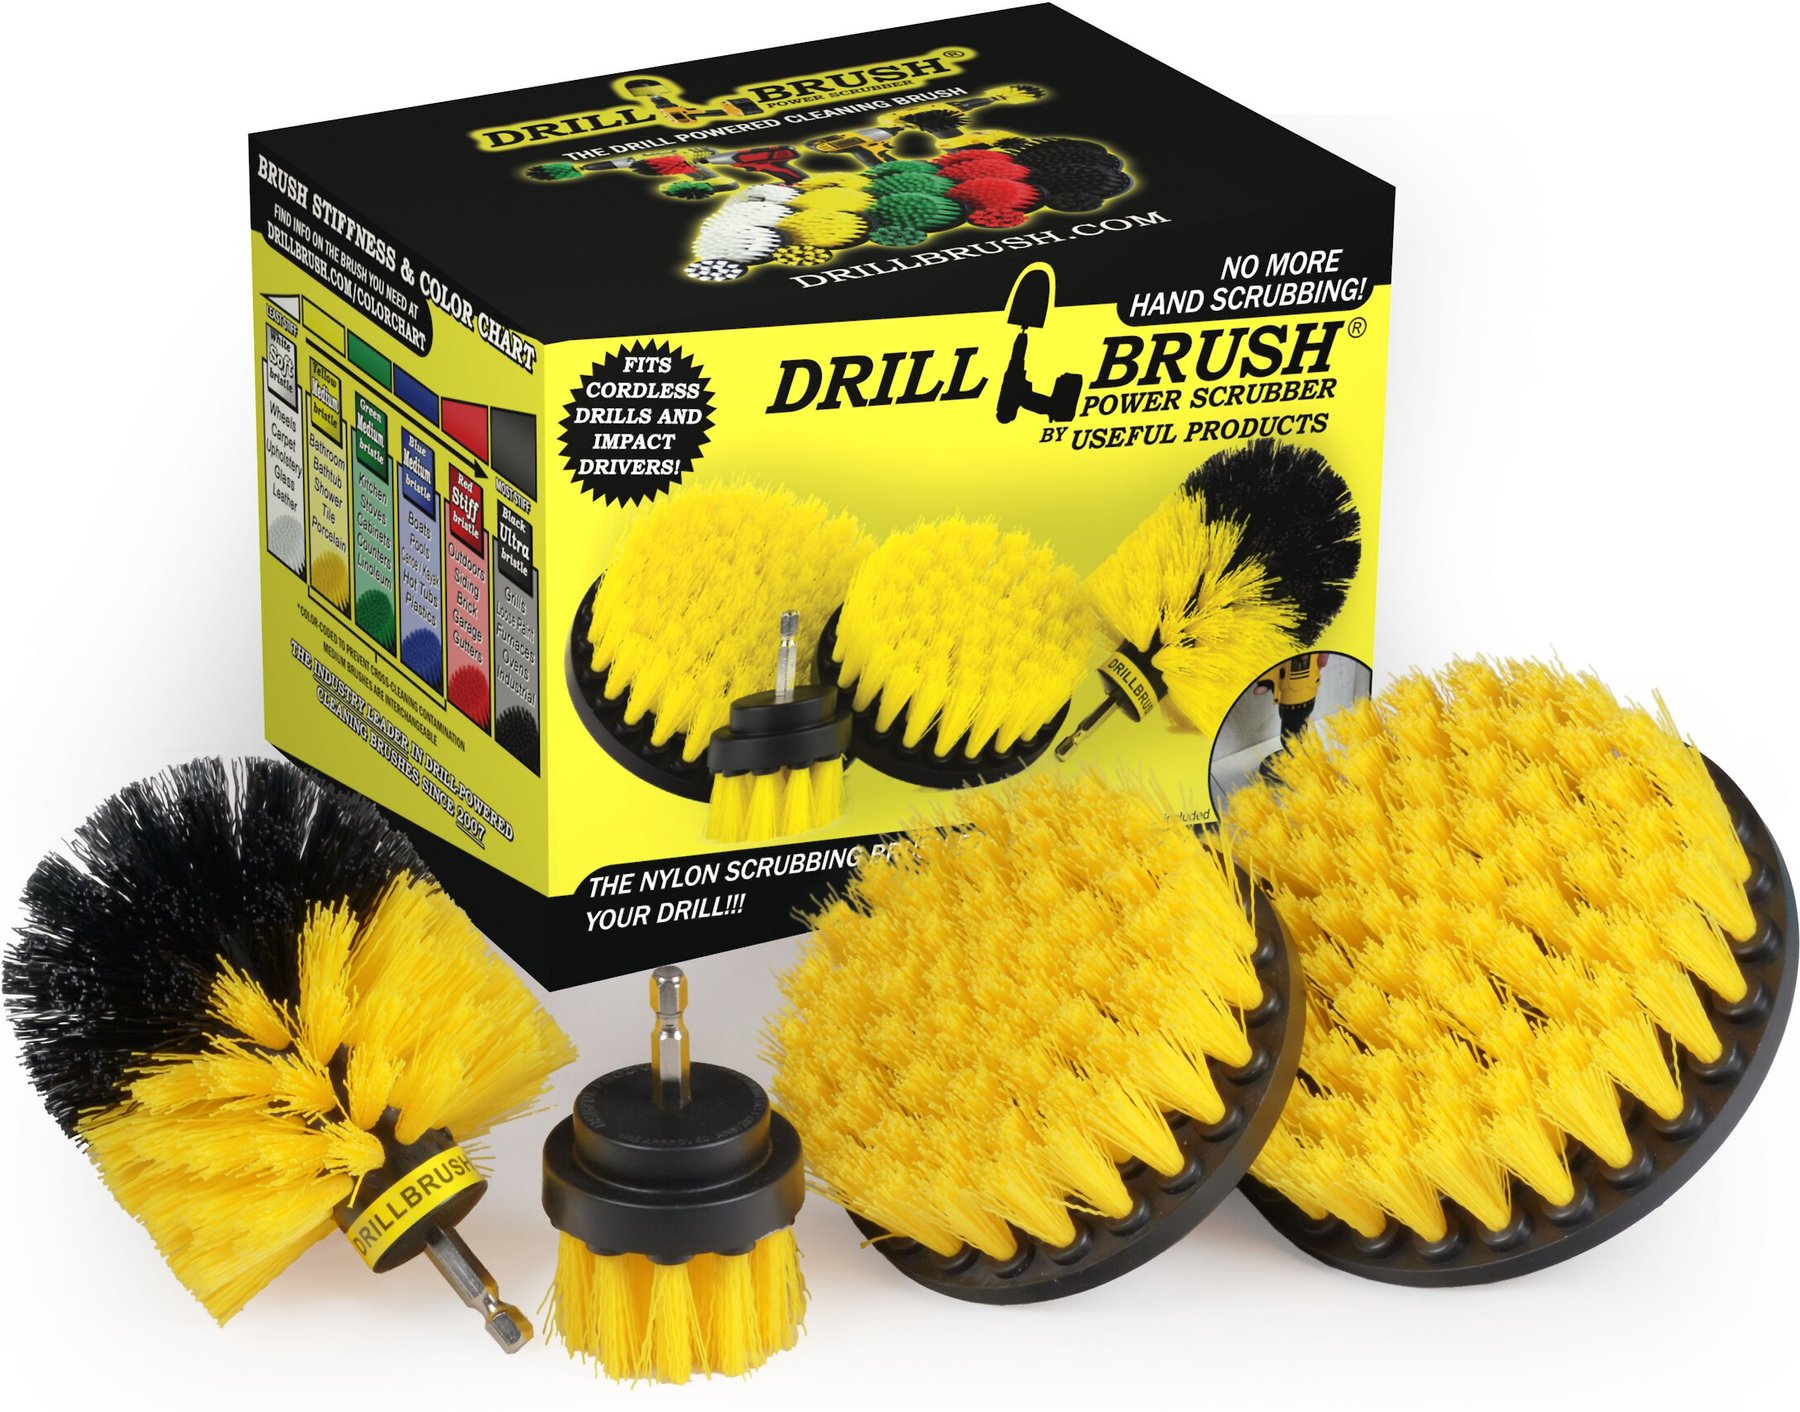 Drill Scrub Brushes Power Scrubber 3pc Bathroom Kitchen Tile Car Cleaning NEW 